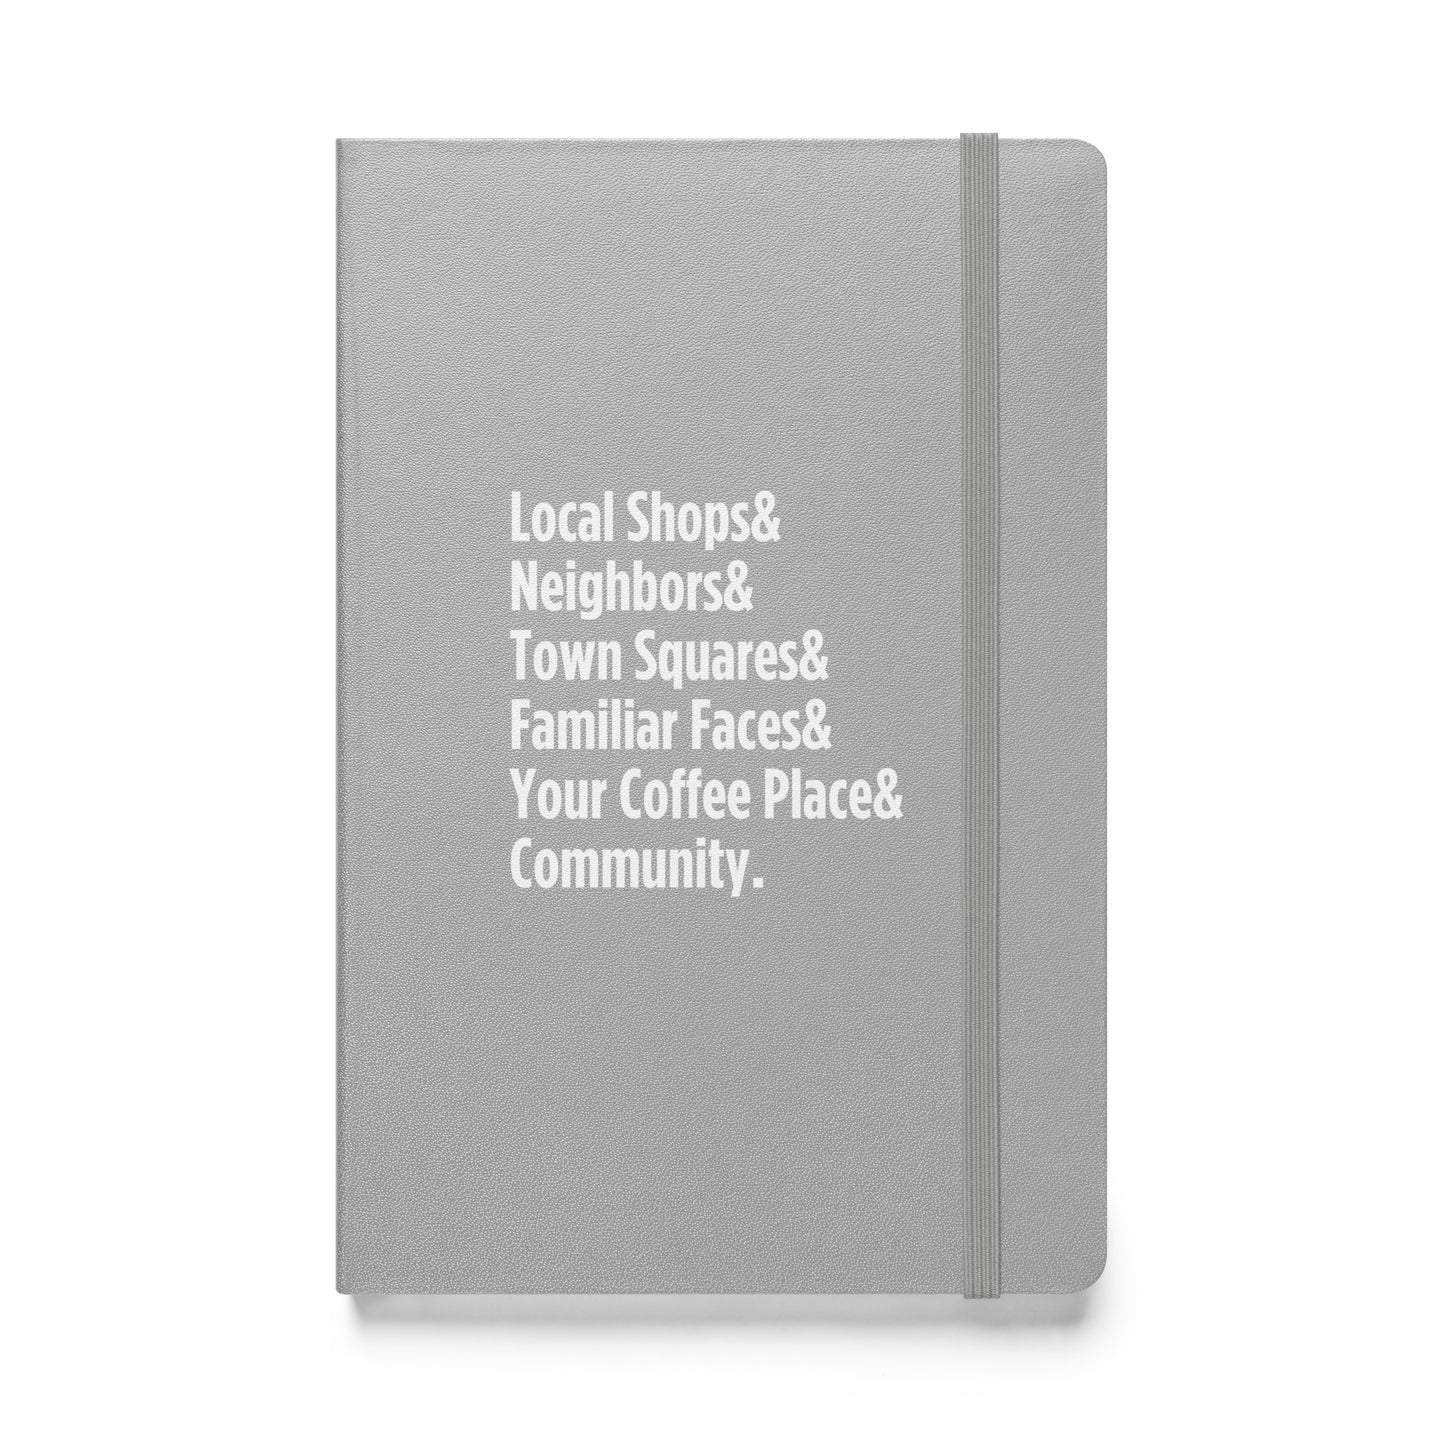 "Only on Main Street" (Community) Hardcover Bound Notebook